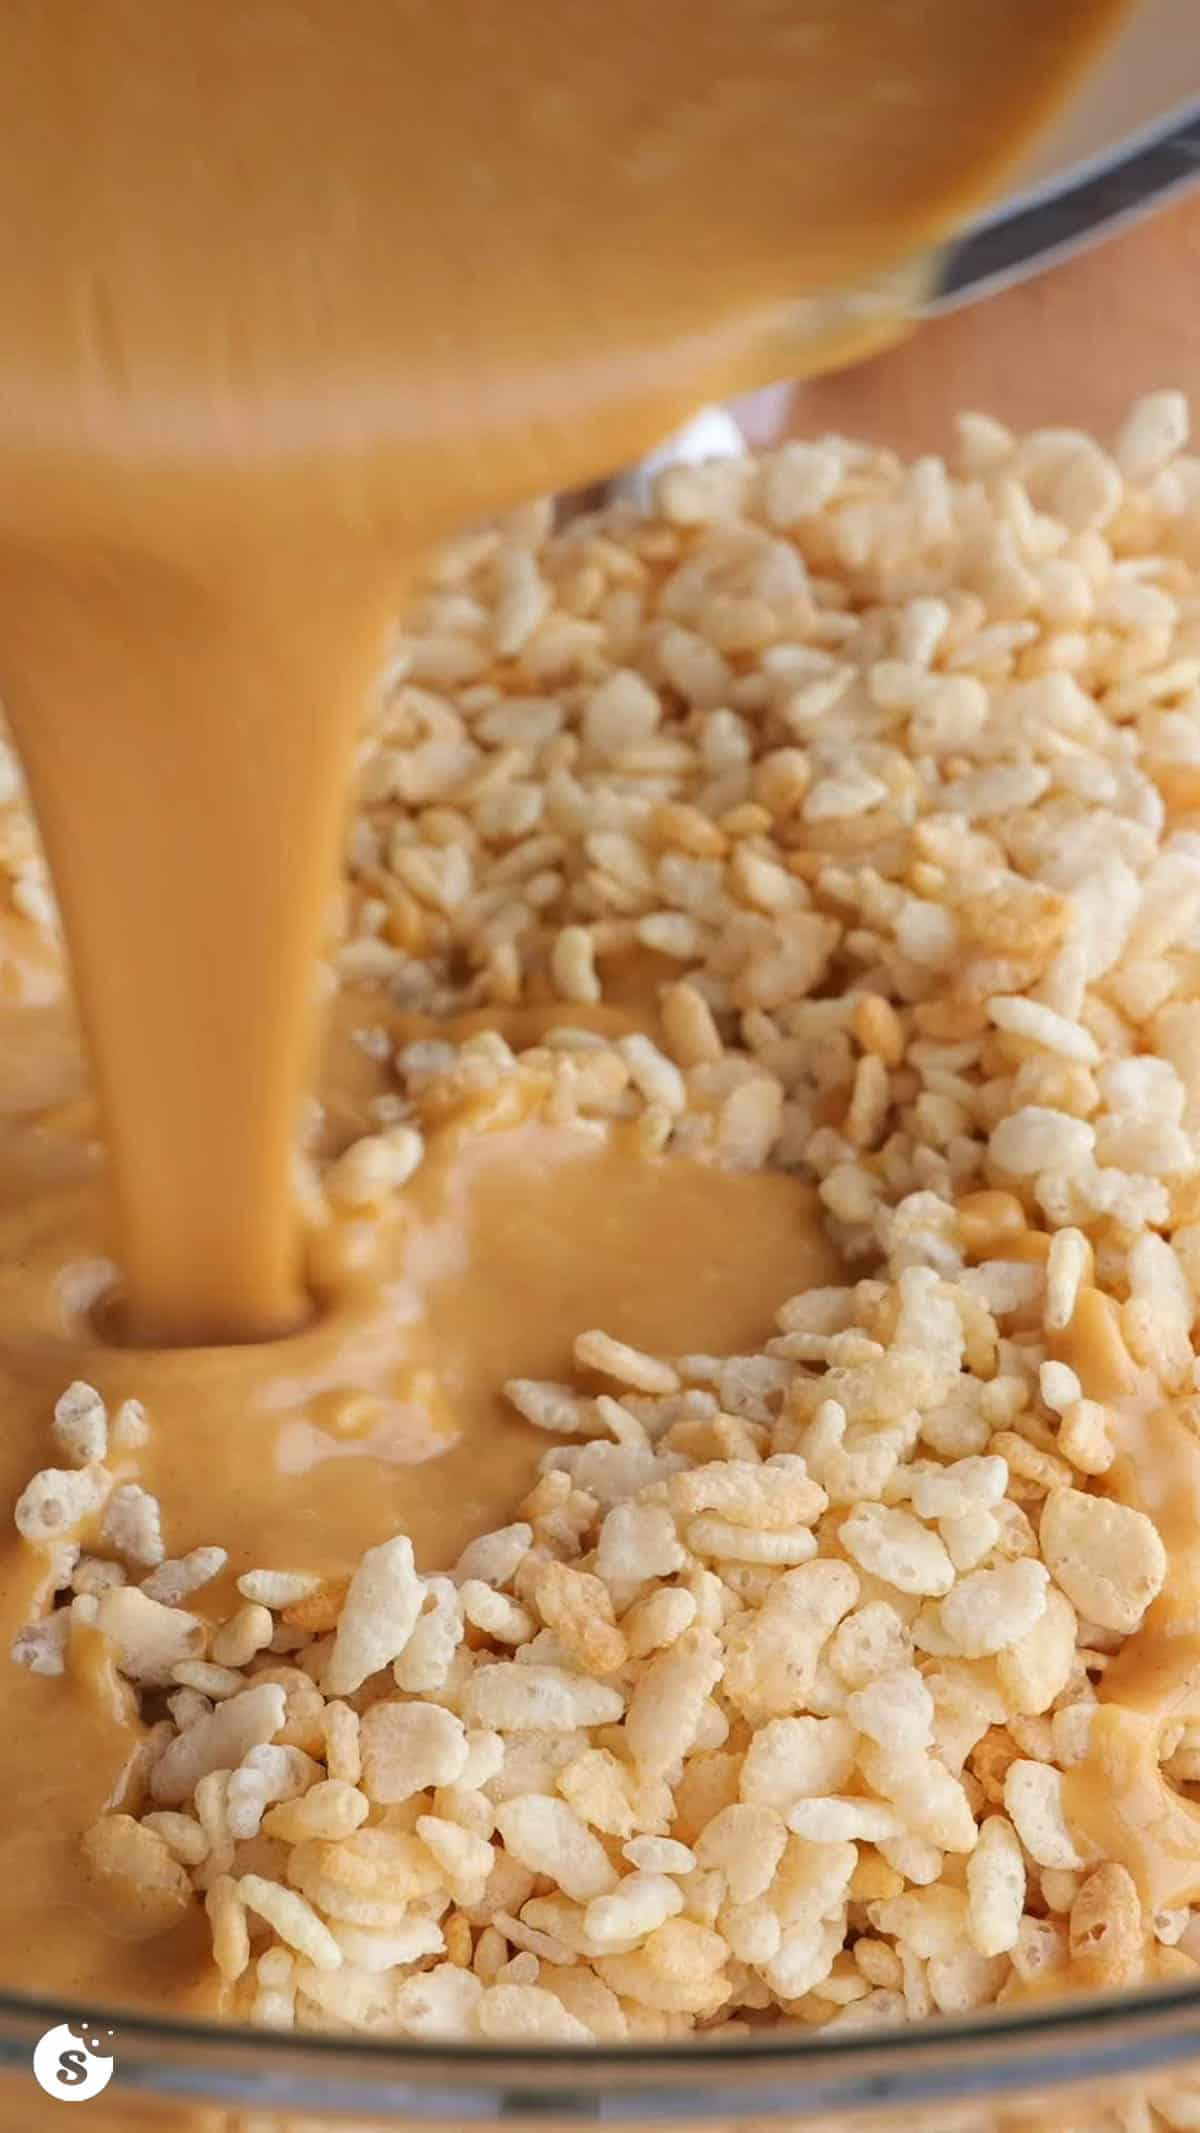 Melted peanut butter being poured into a bowl of rice krispies